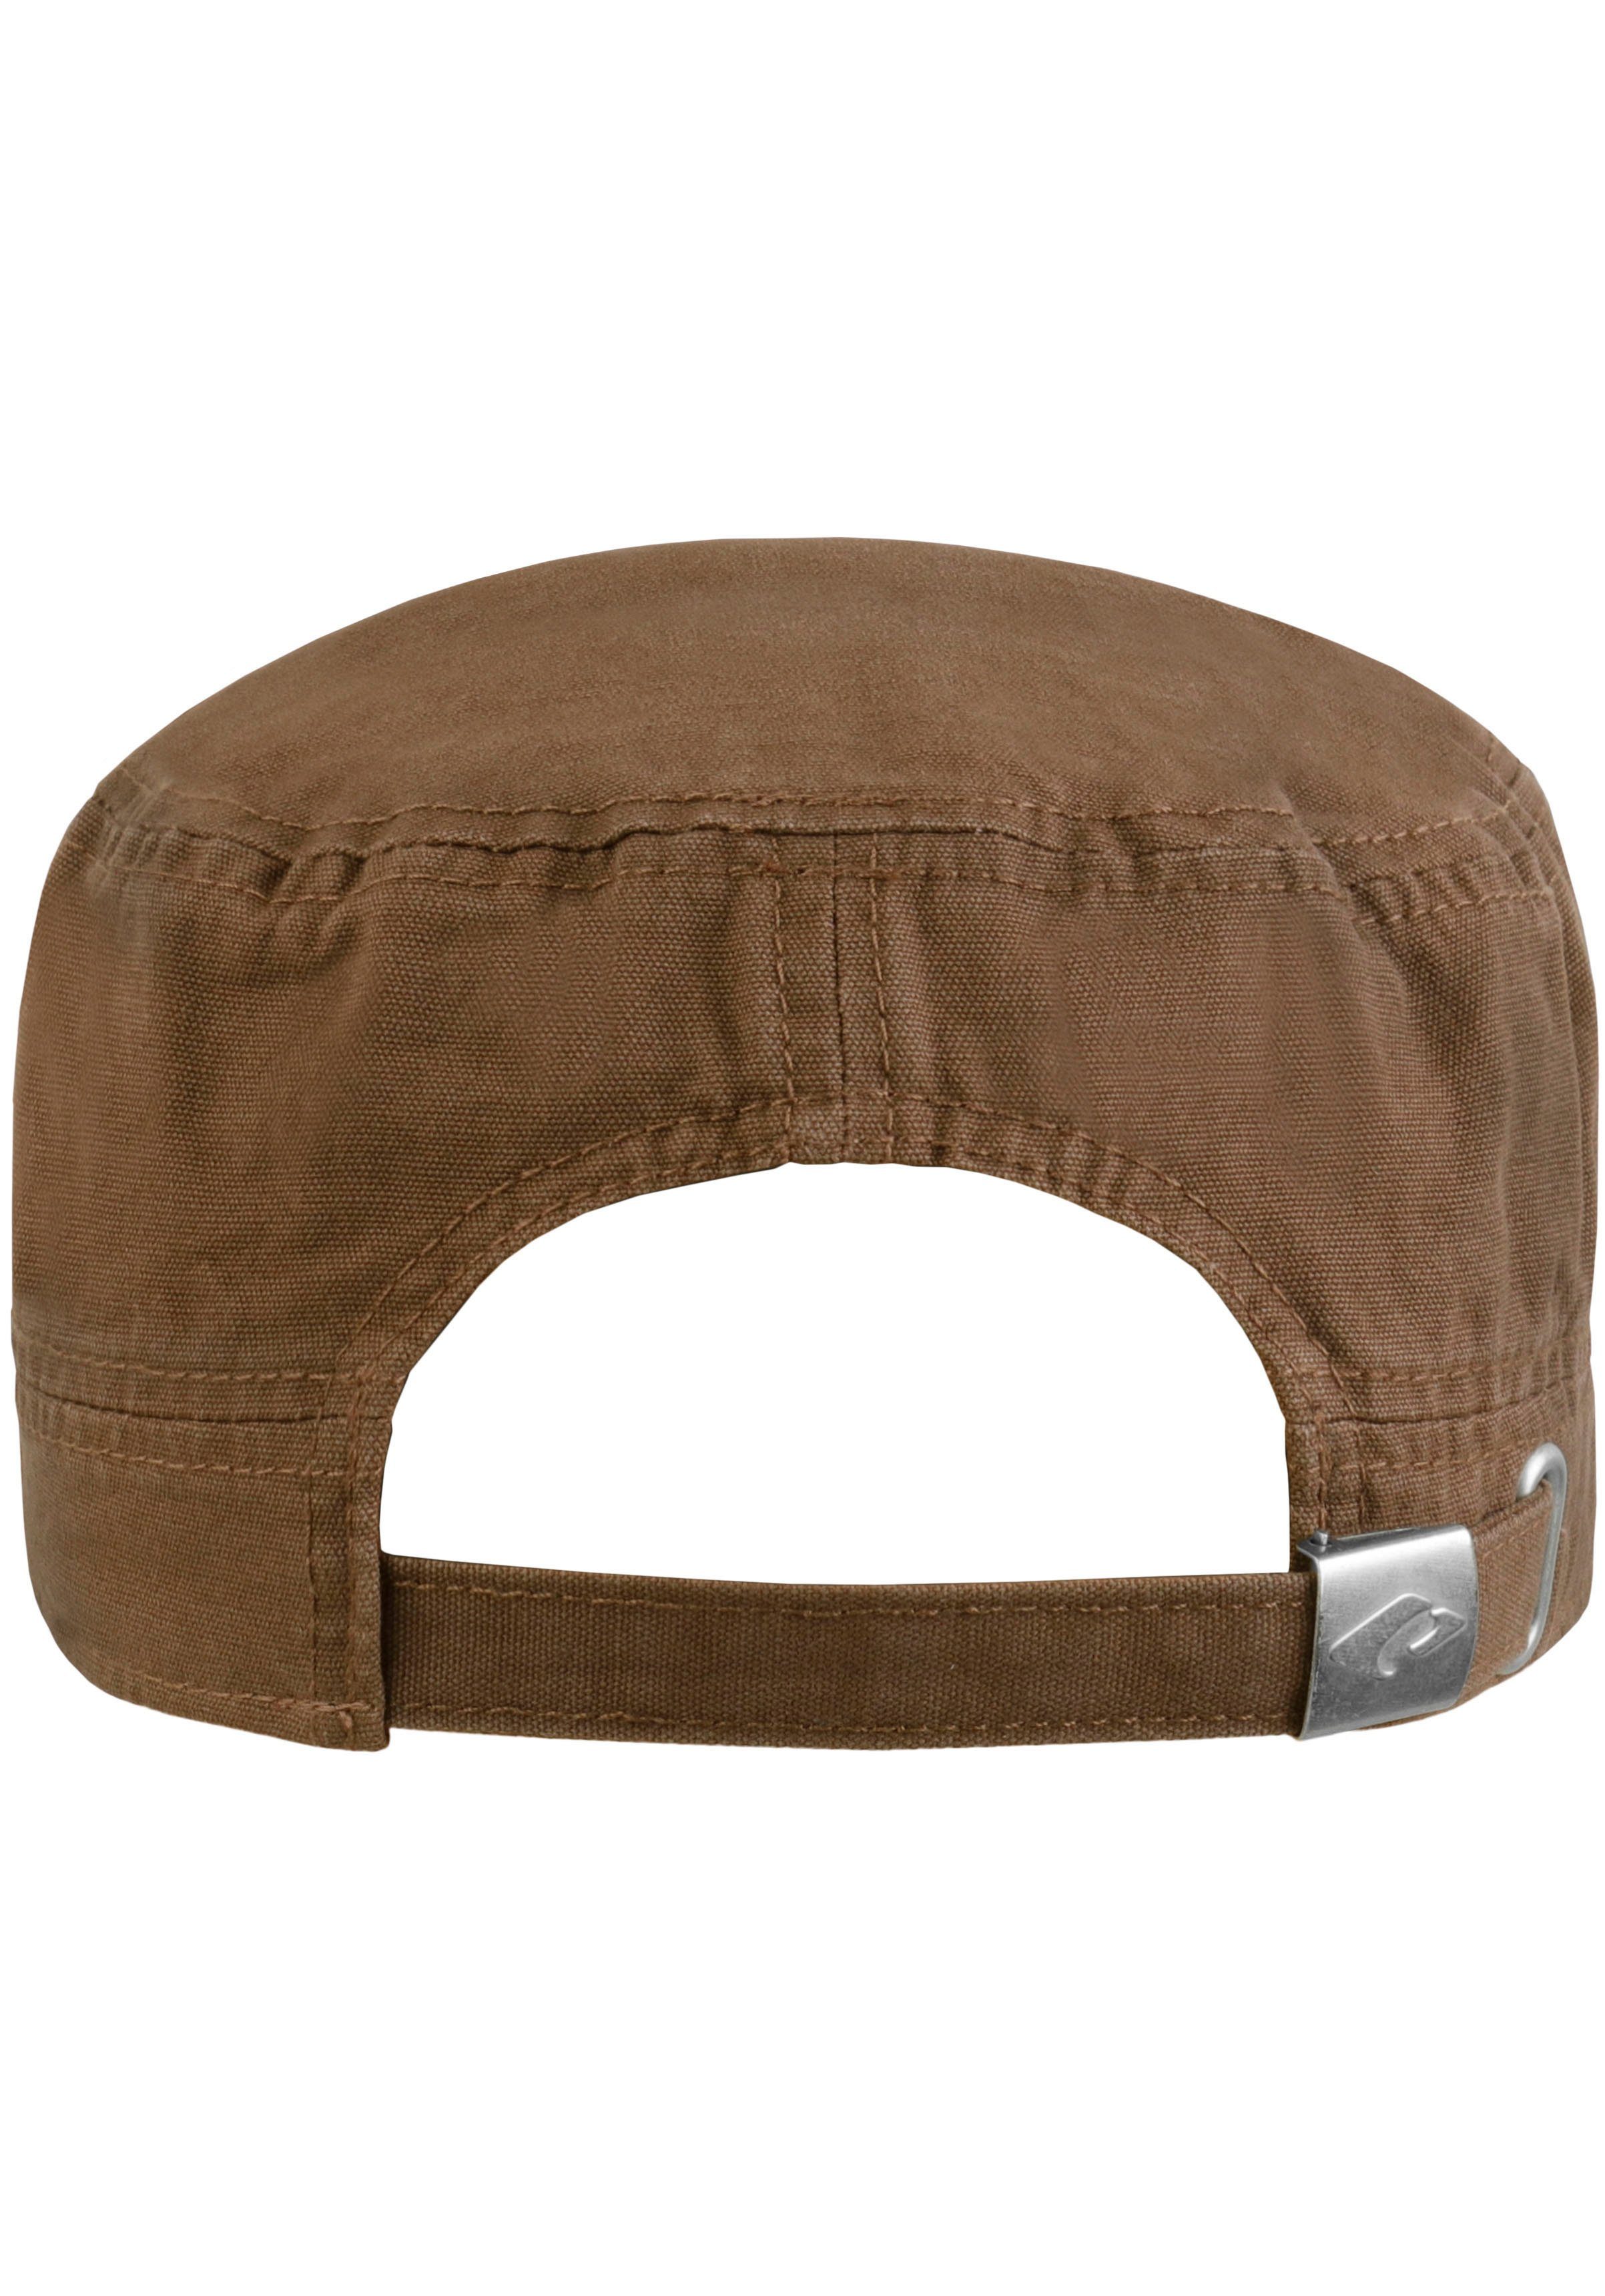 Dublin Cap Mililtary-Style Army chillouts Cap im braun Hat